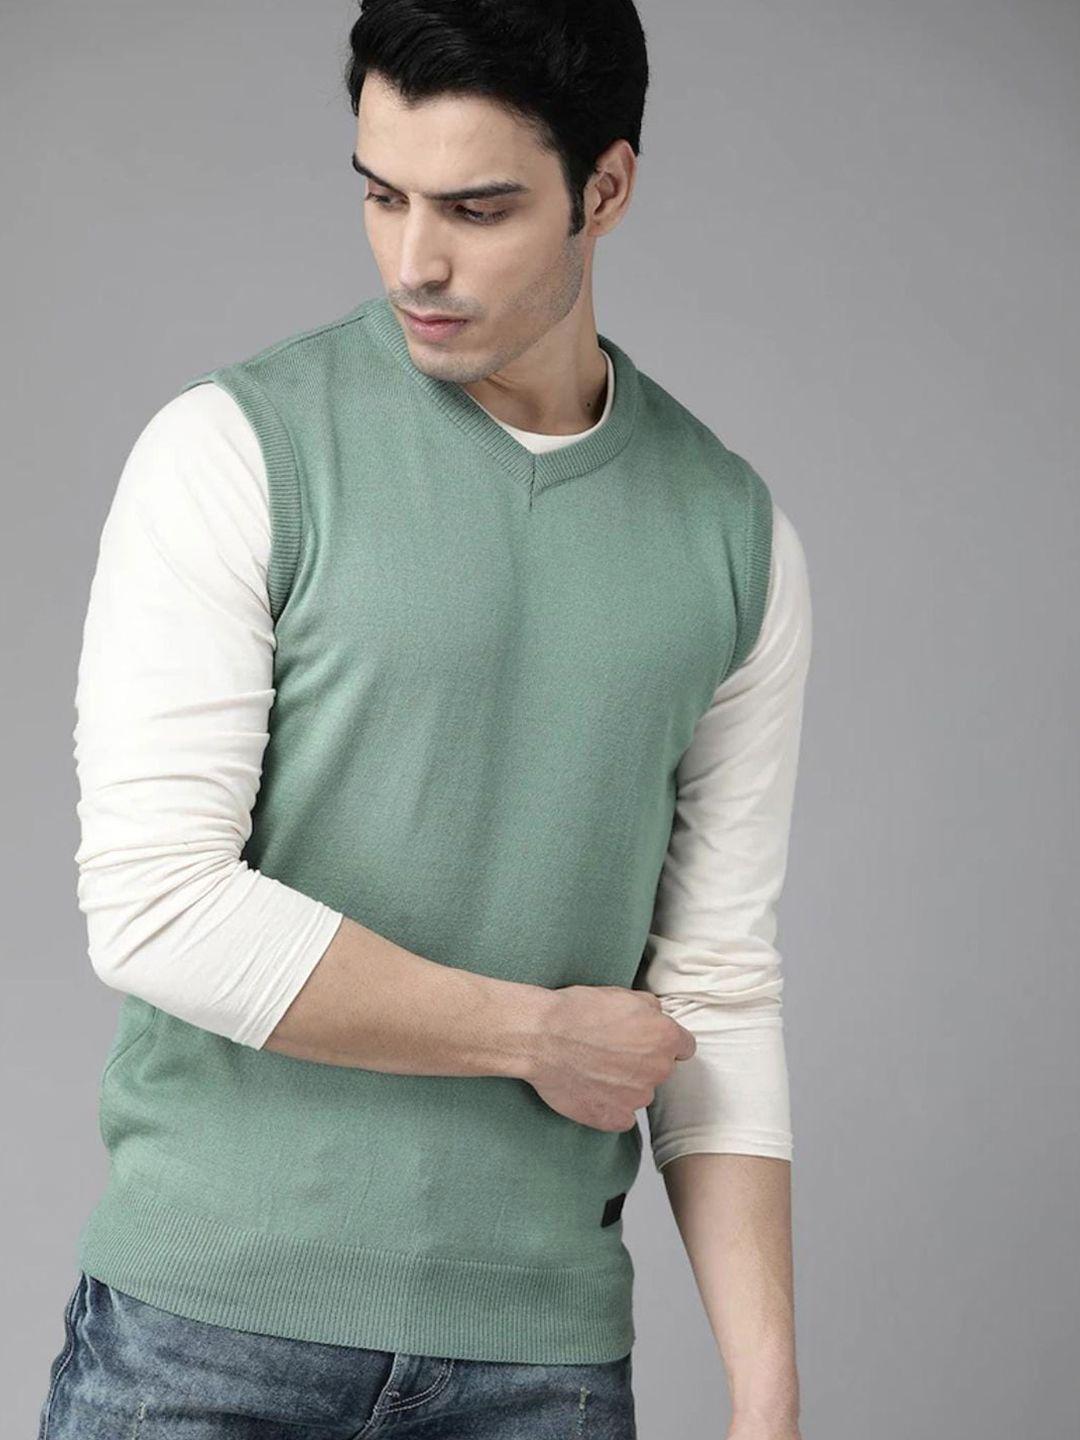 the-roadster-life-co.-v-neck-sleeveless-pure-acrylic-sweater-vest